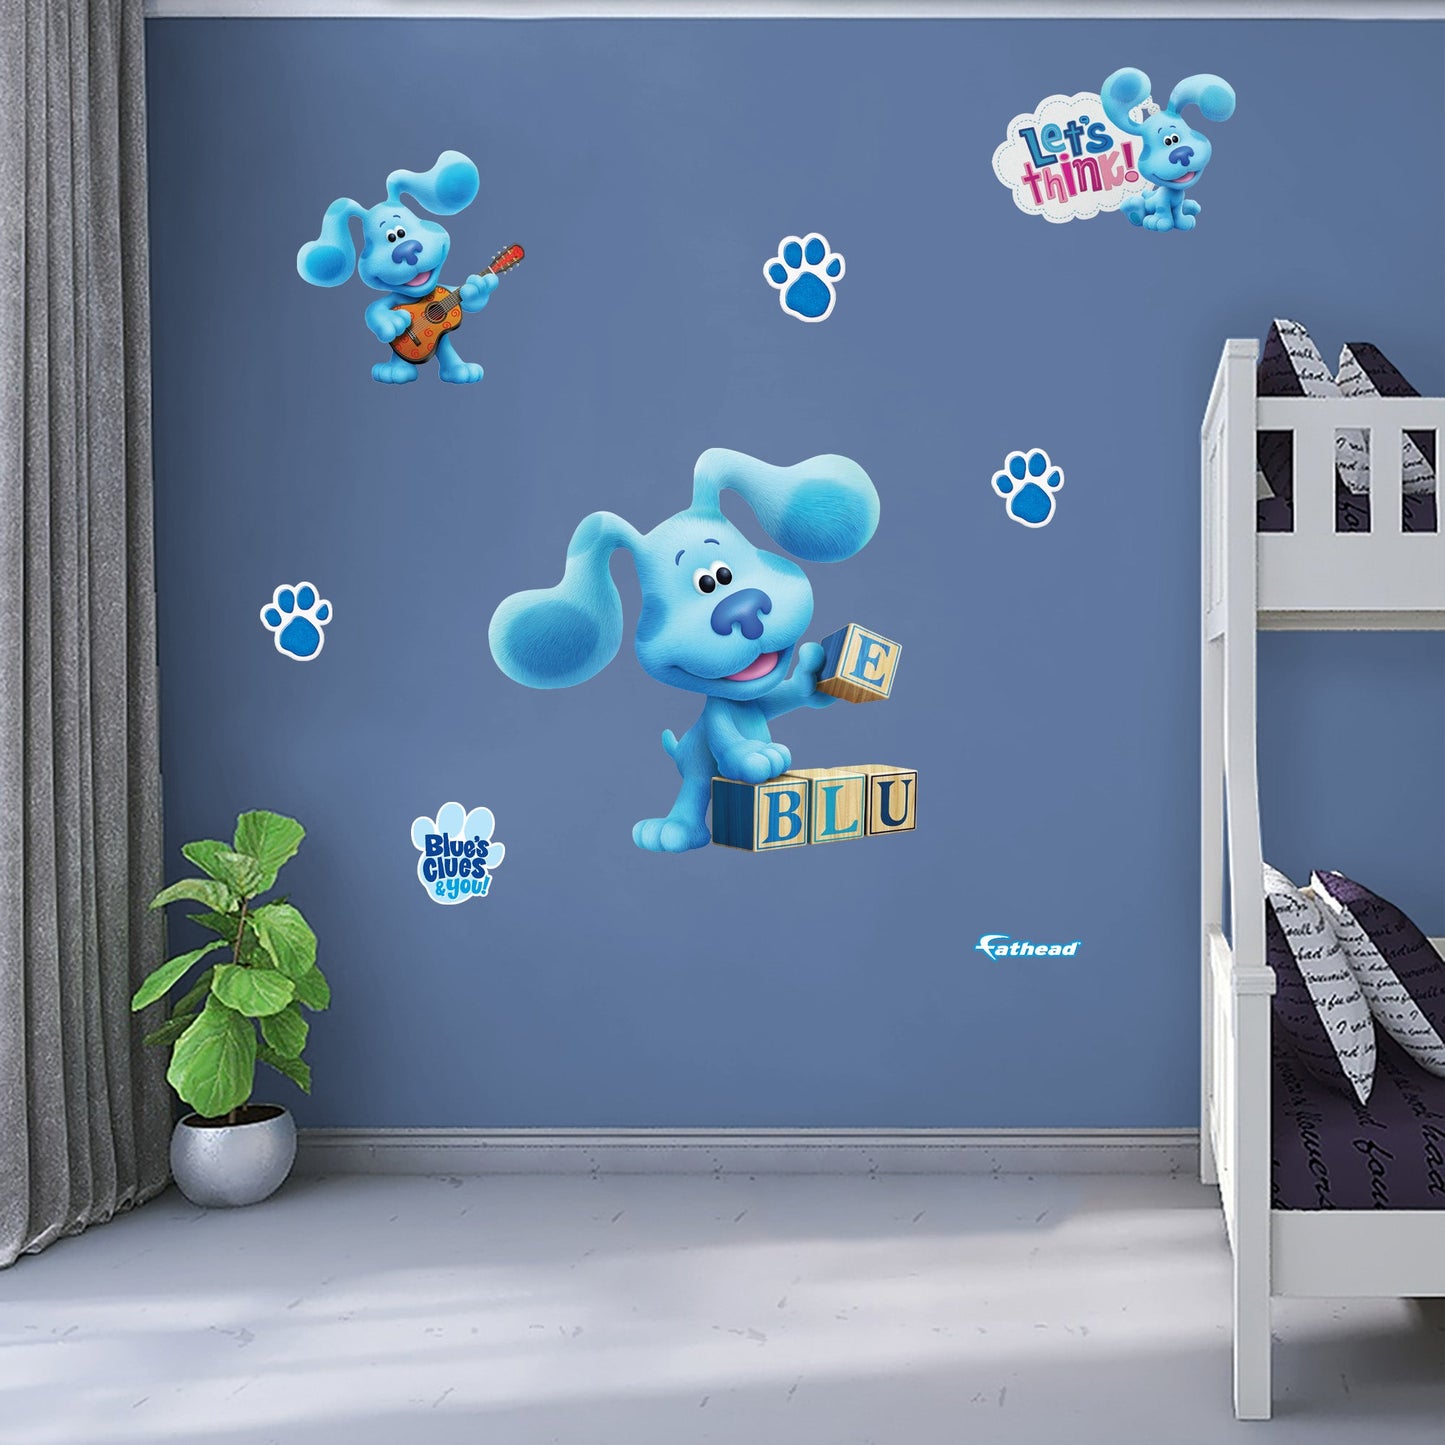 Blue's Clues: Blue RealBigs - Officially Licensed Nickelodeon Removable Adhesive Decal